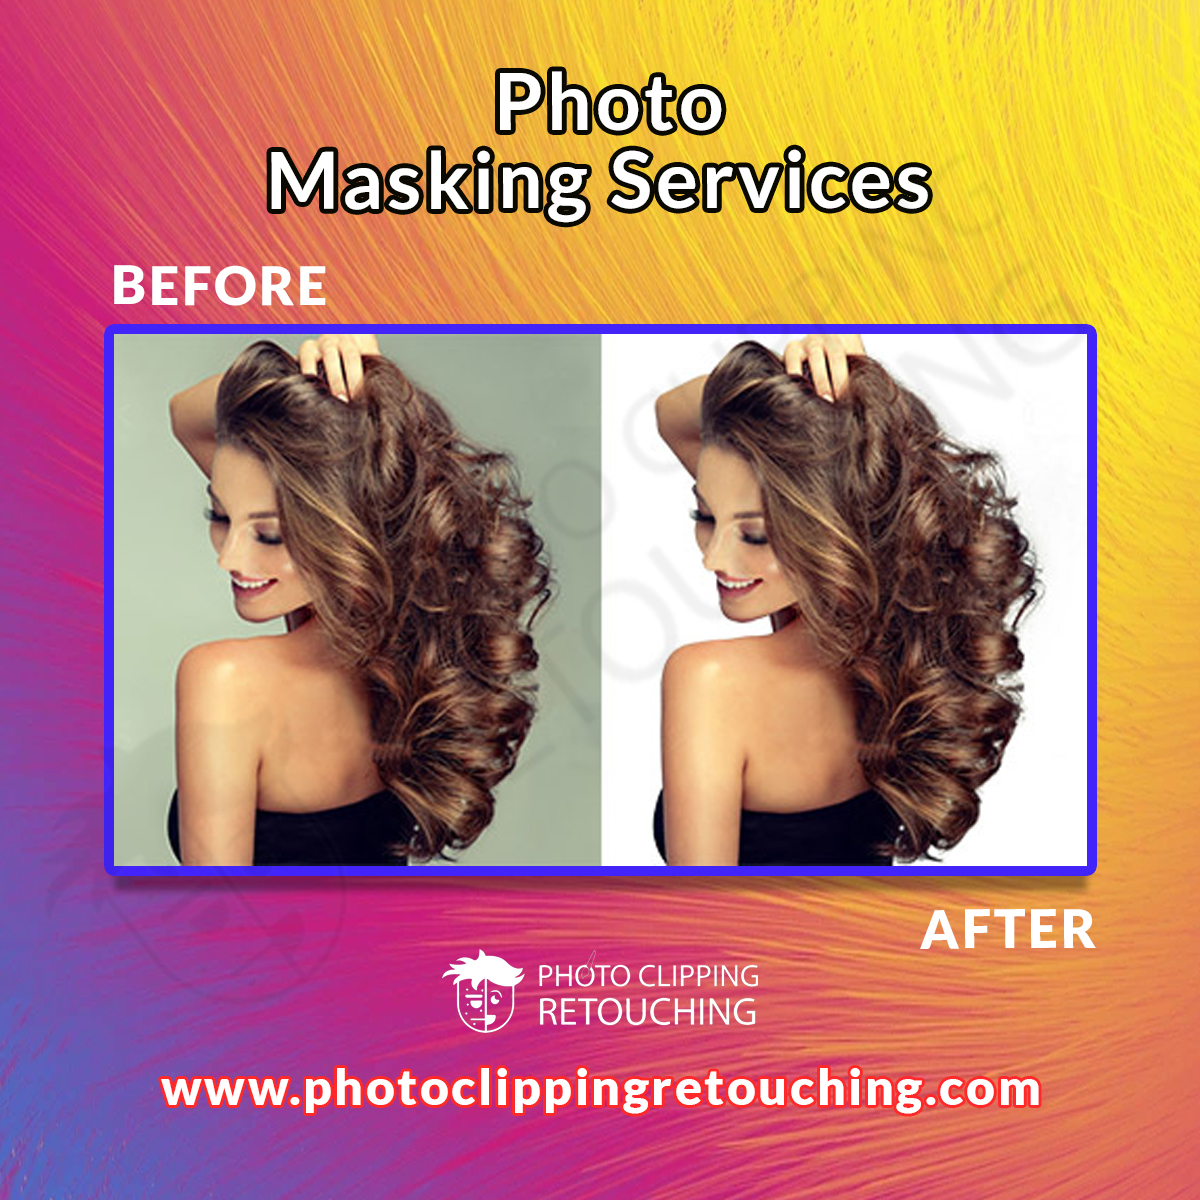 Background Blues? Not Anymore!
Let our Photo Masking Service work its magic & make your images pop!
#PhotoMasking #MaskingService #BeforeAndAfter #PhotoEditing #EditingServices #GraphicDesign #PCRgraphics

Email: info@photoclippingretouching.com
Link: photoclippingretouching.com/photoshop-imag…